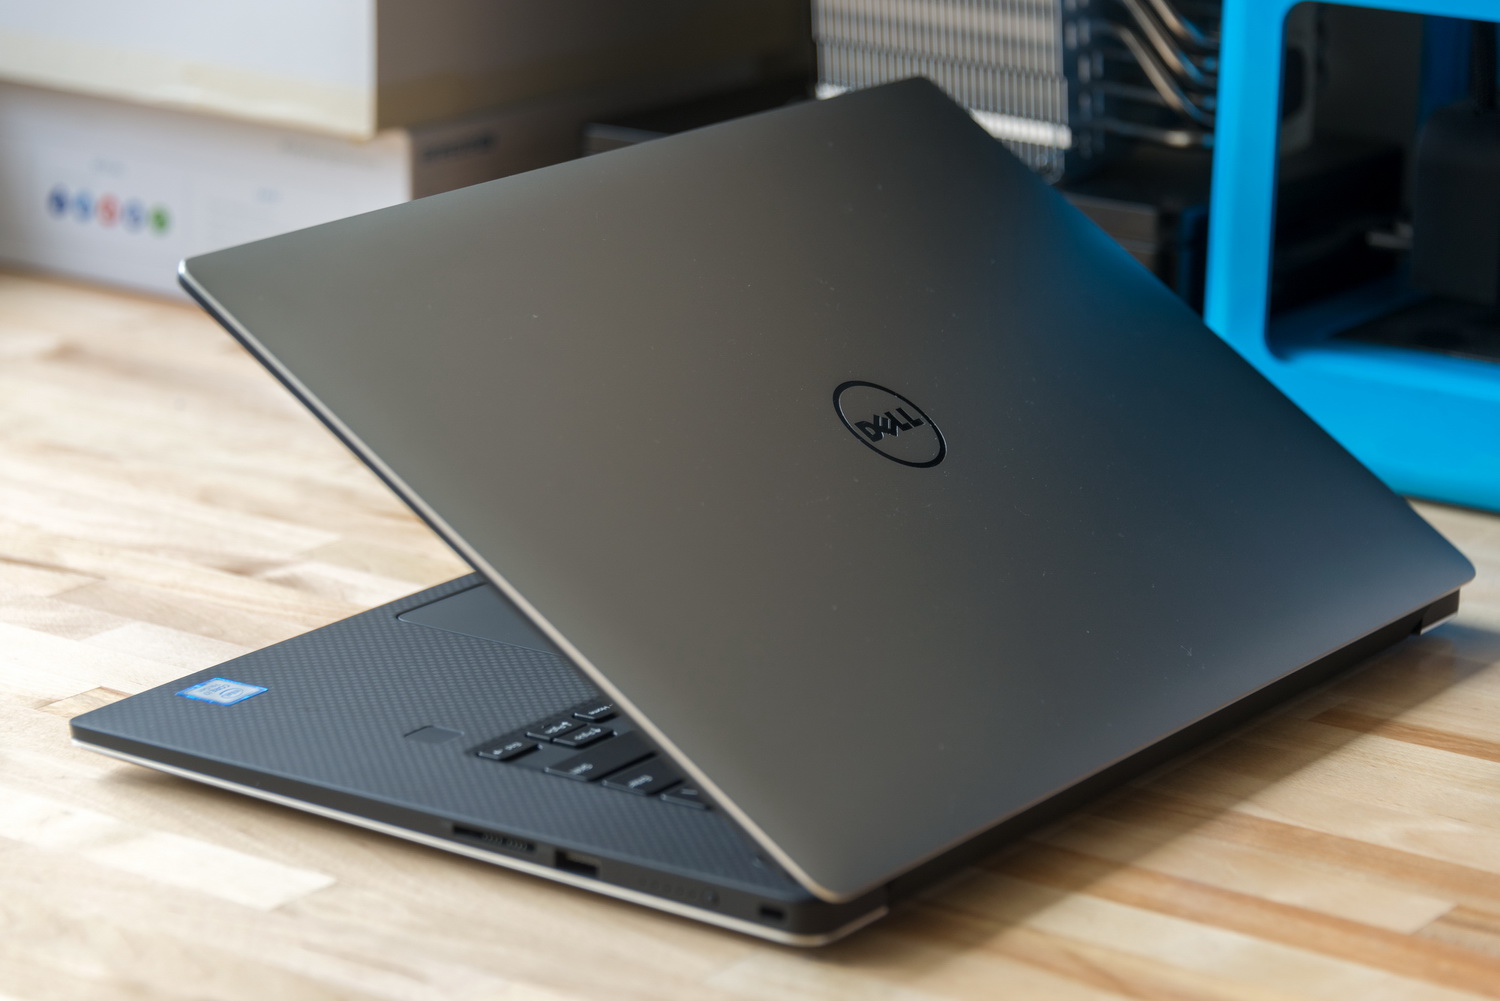 Next Dell XPS 15 Will Have Better Thunderbolt 3 Support, VP says | Digital Trends